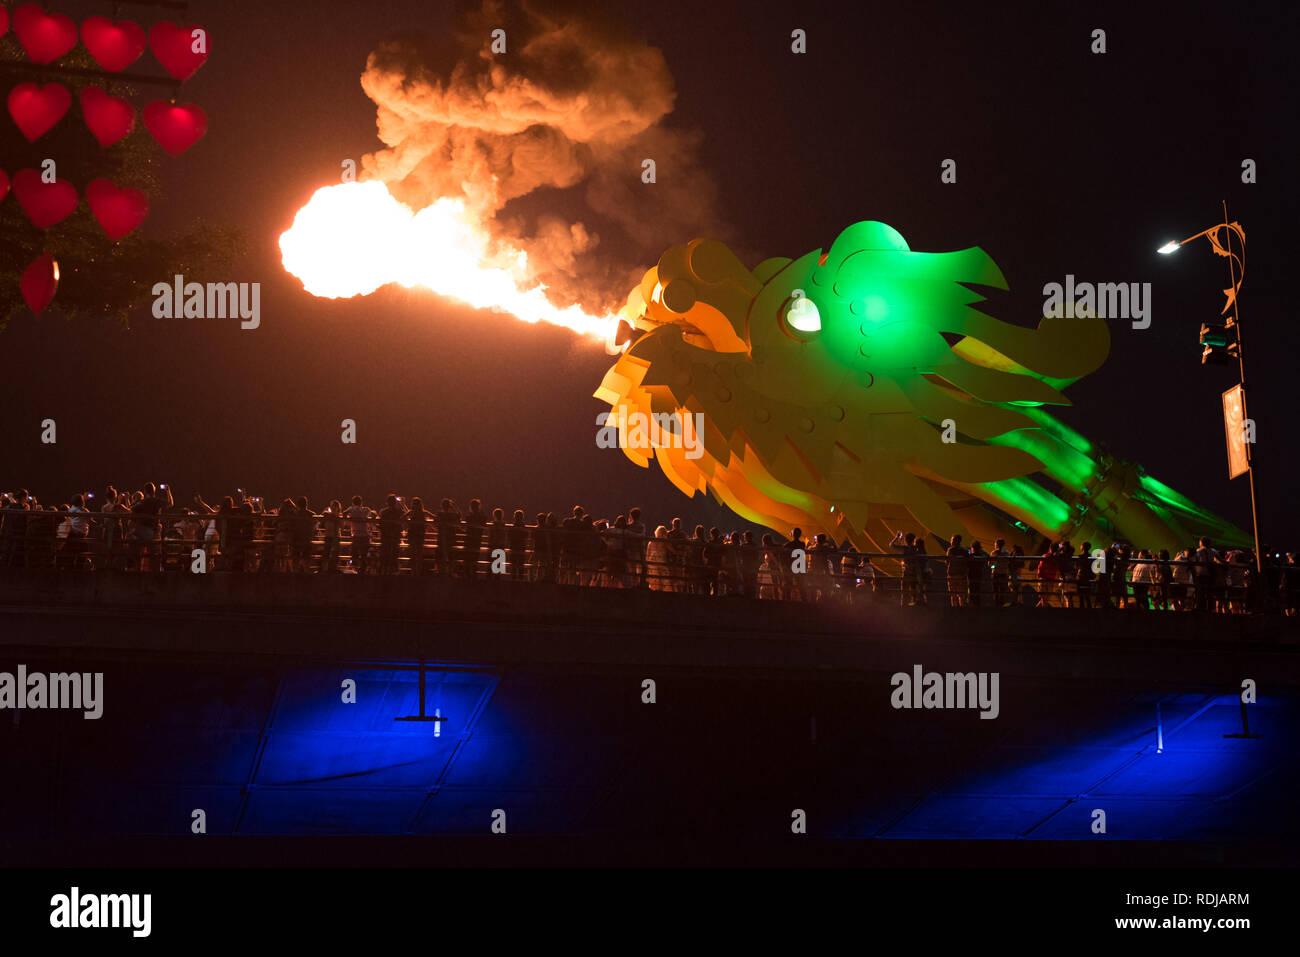 Da Nang, Vietnam - November 11, 2018: the head of the bridge dragon spews smoking fire in the darkness of night in front of the spectators' crowd. Stock Photo